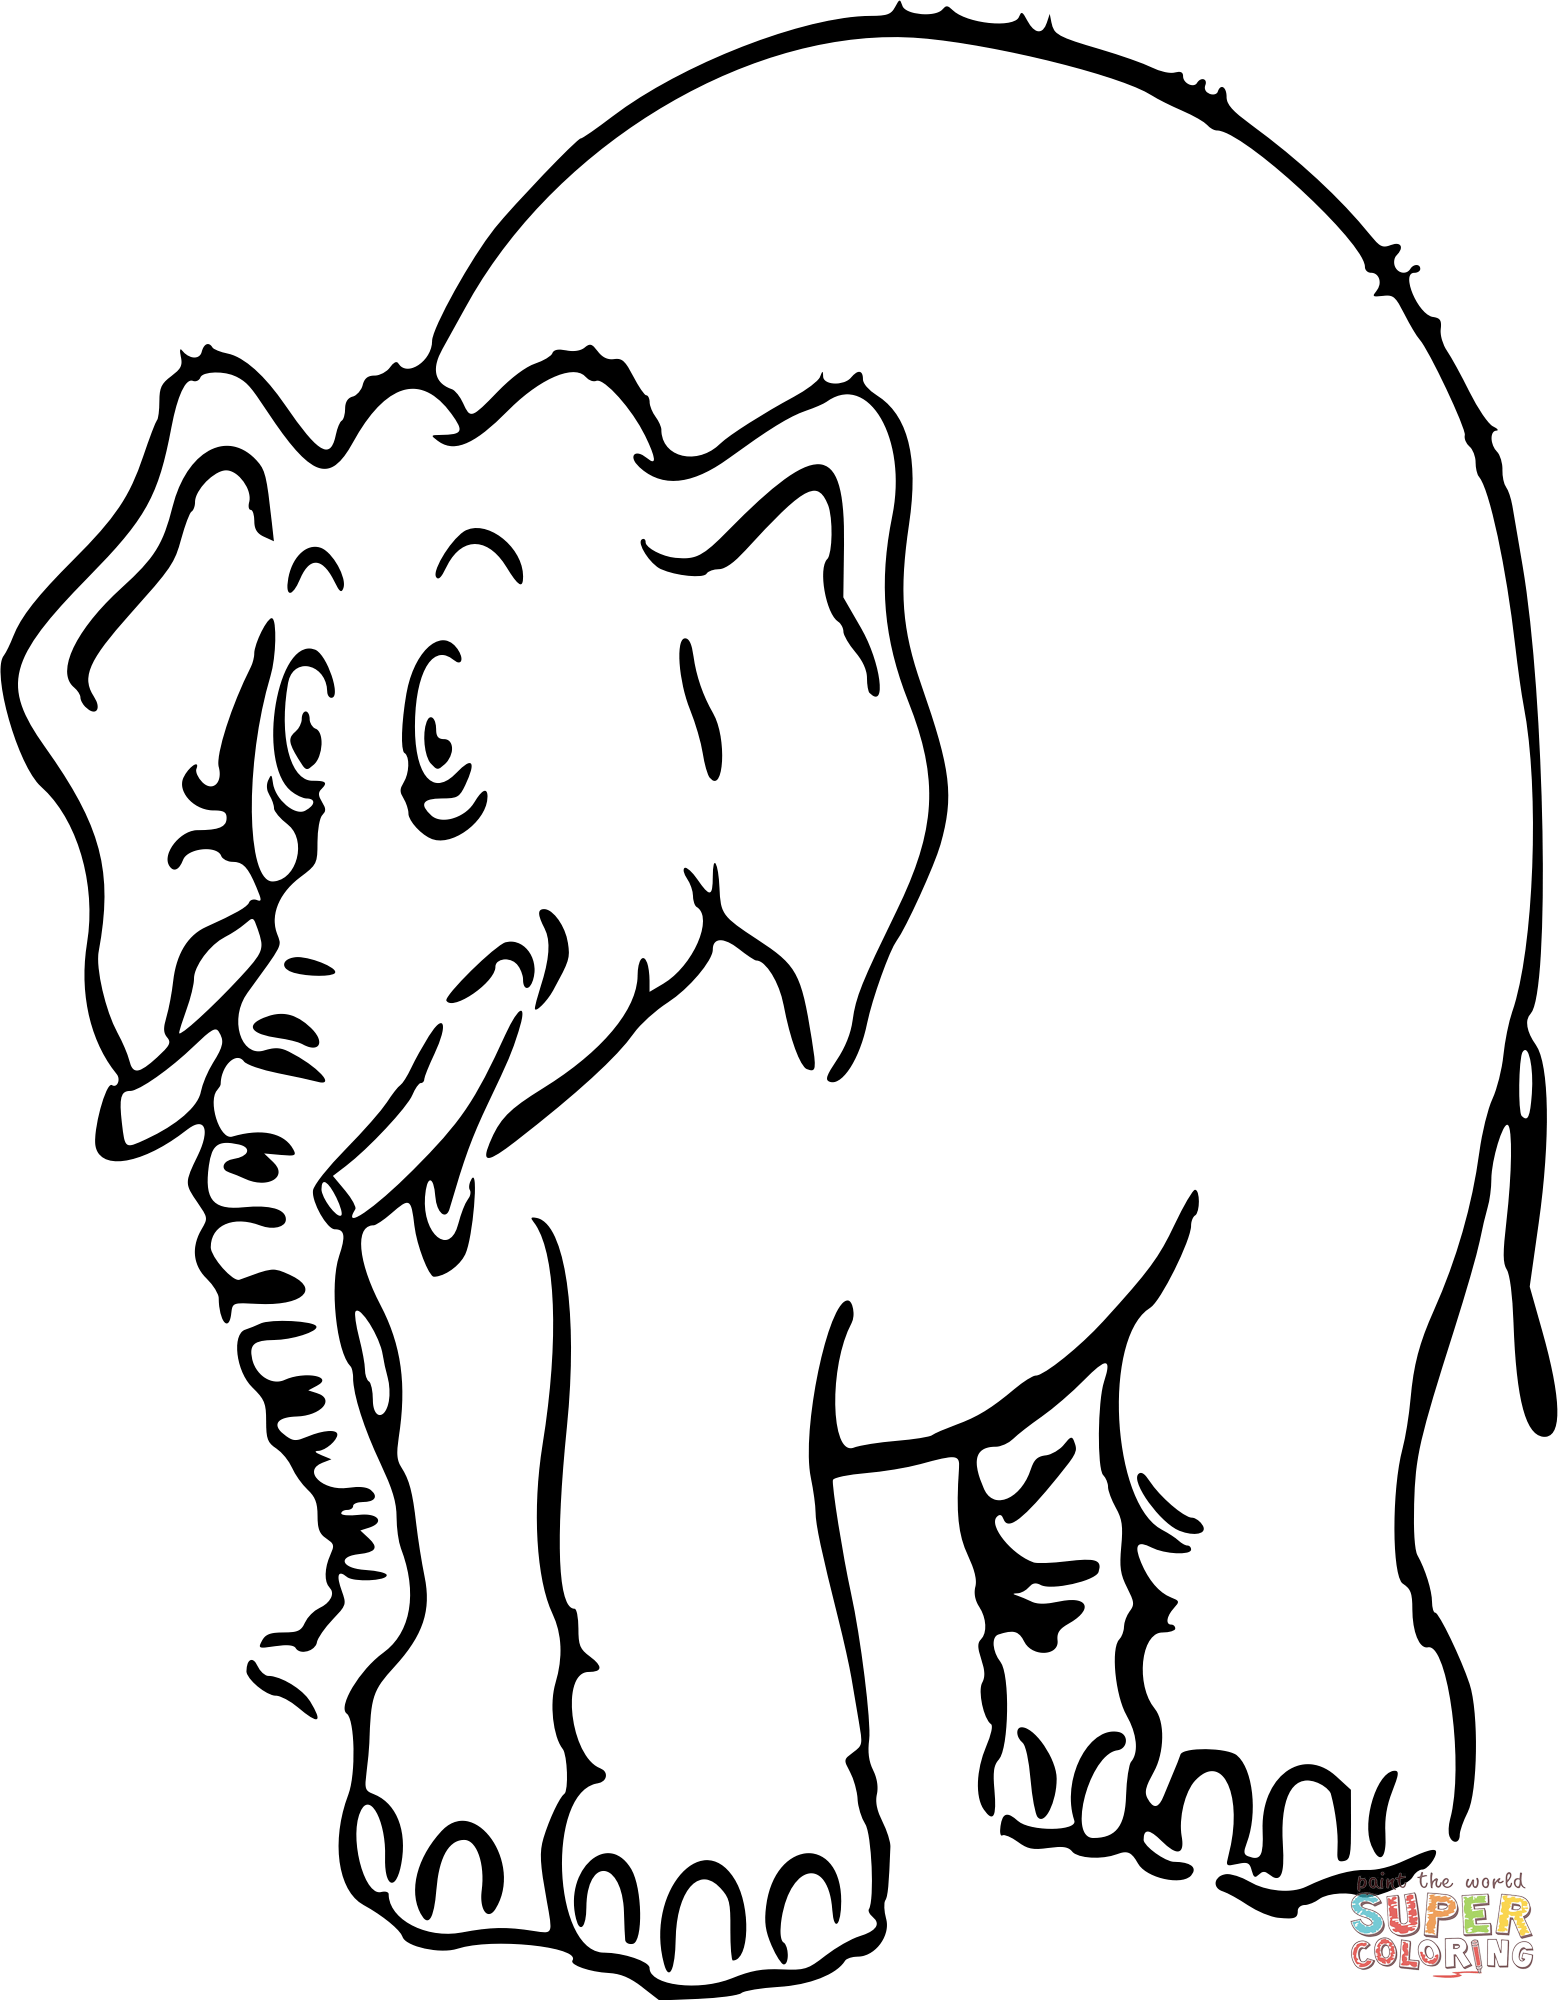 Elephant-12-coloring-page